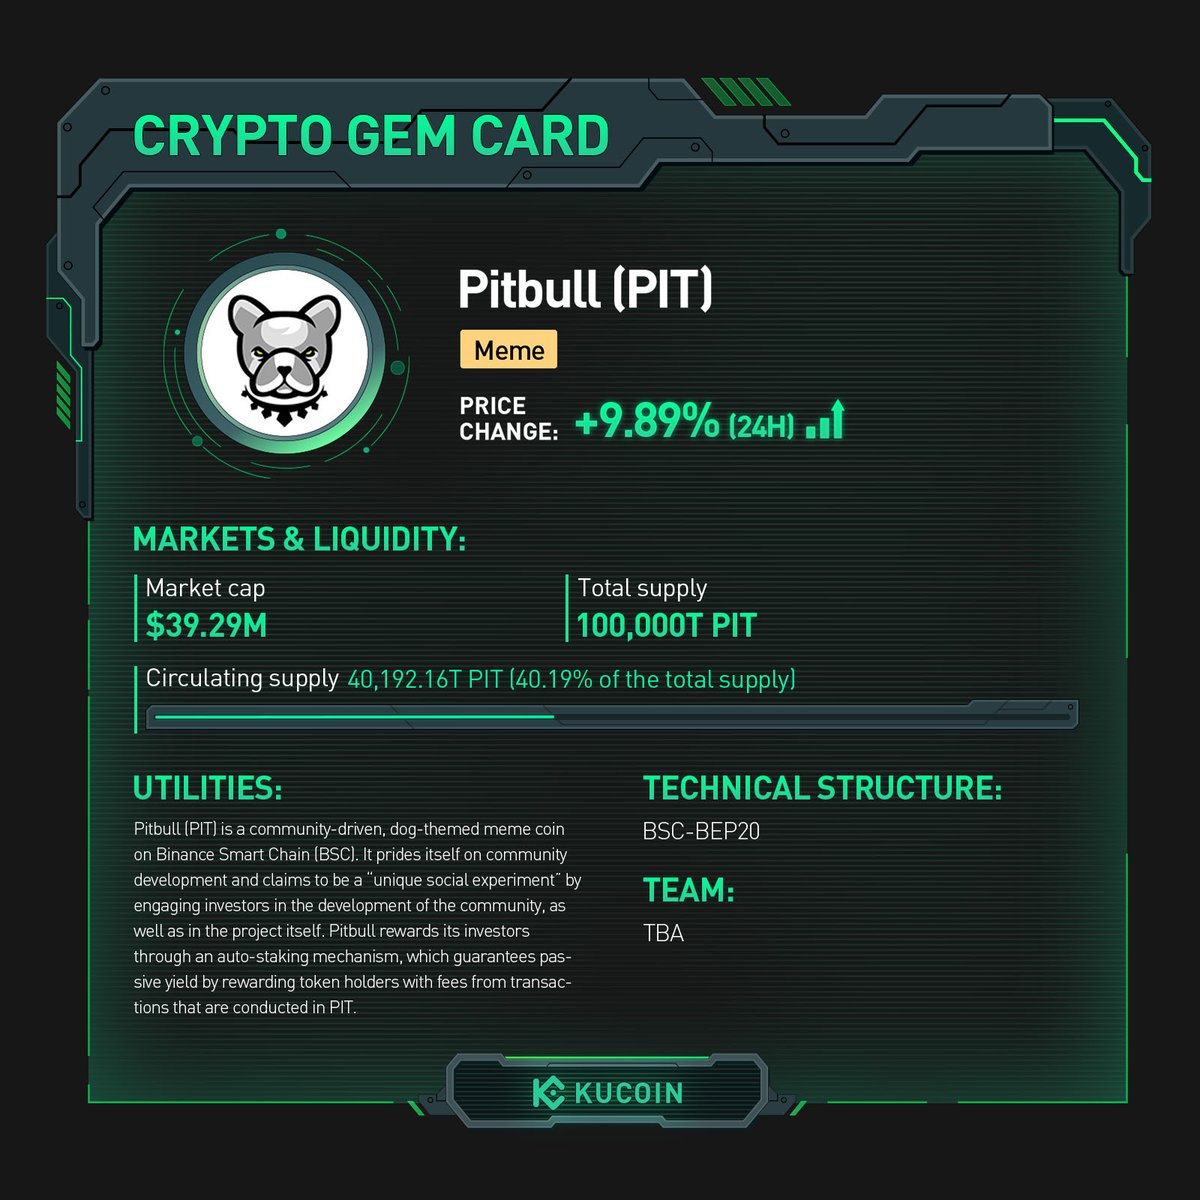 $PIT trading is now live on #KuCoin! 🚀PIT/USDT: trade.kucoin.com/PIT-USDT?utm_s… Find out more about Pitbull in #KuCoinCryptoGem card. #Meme